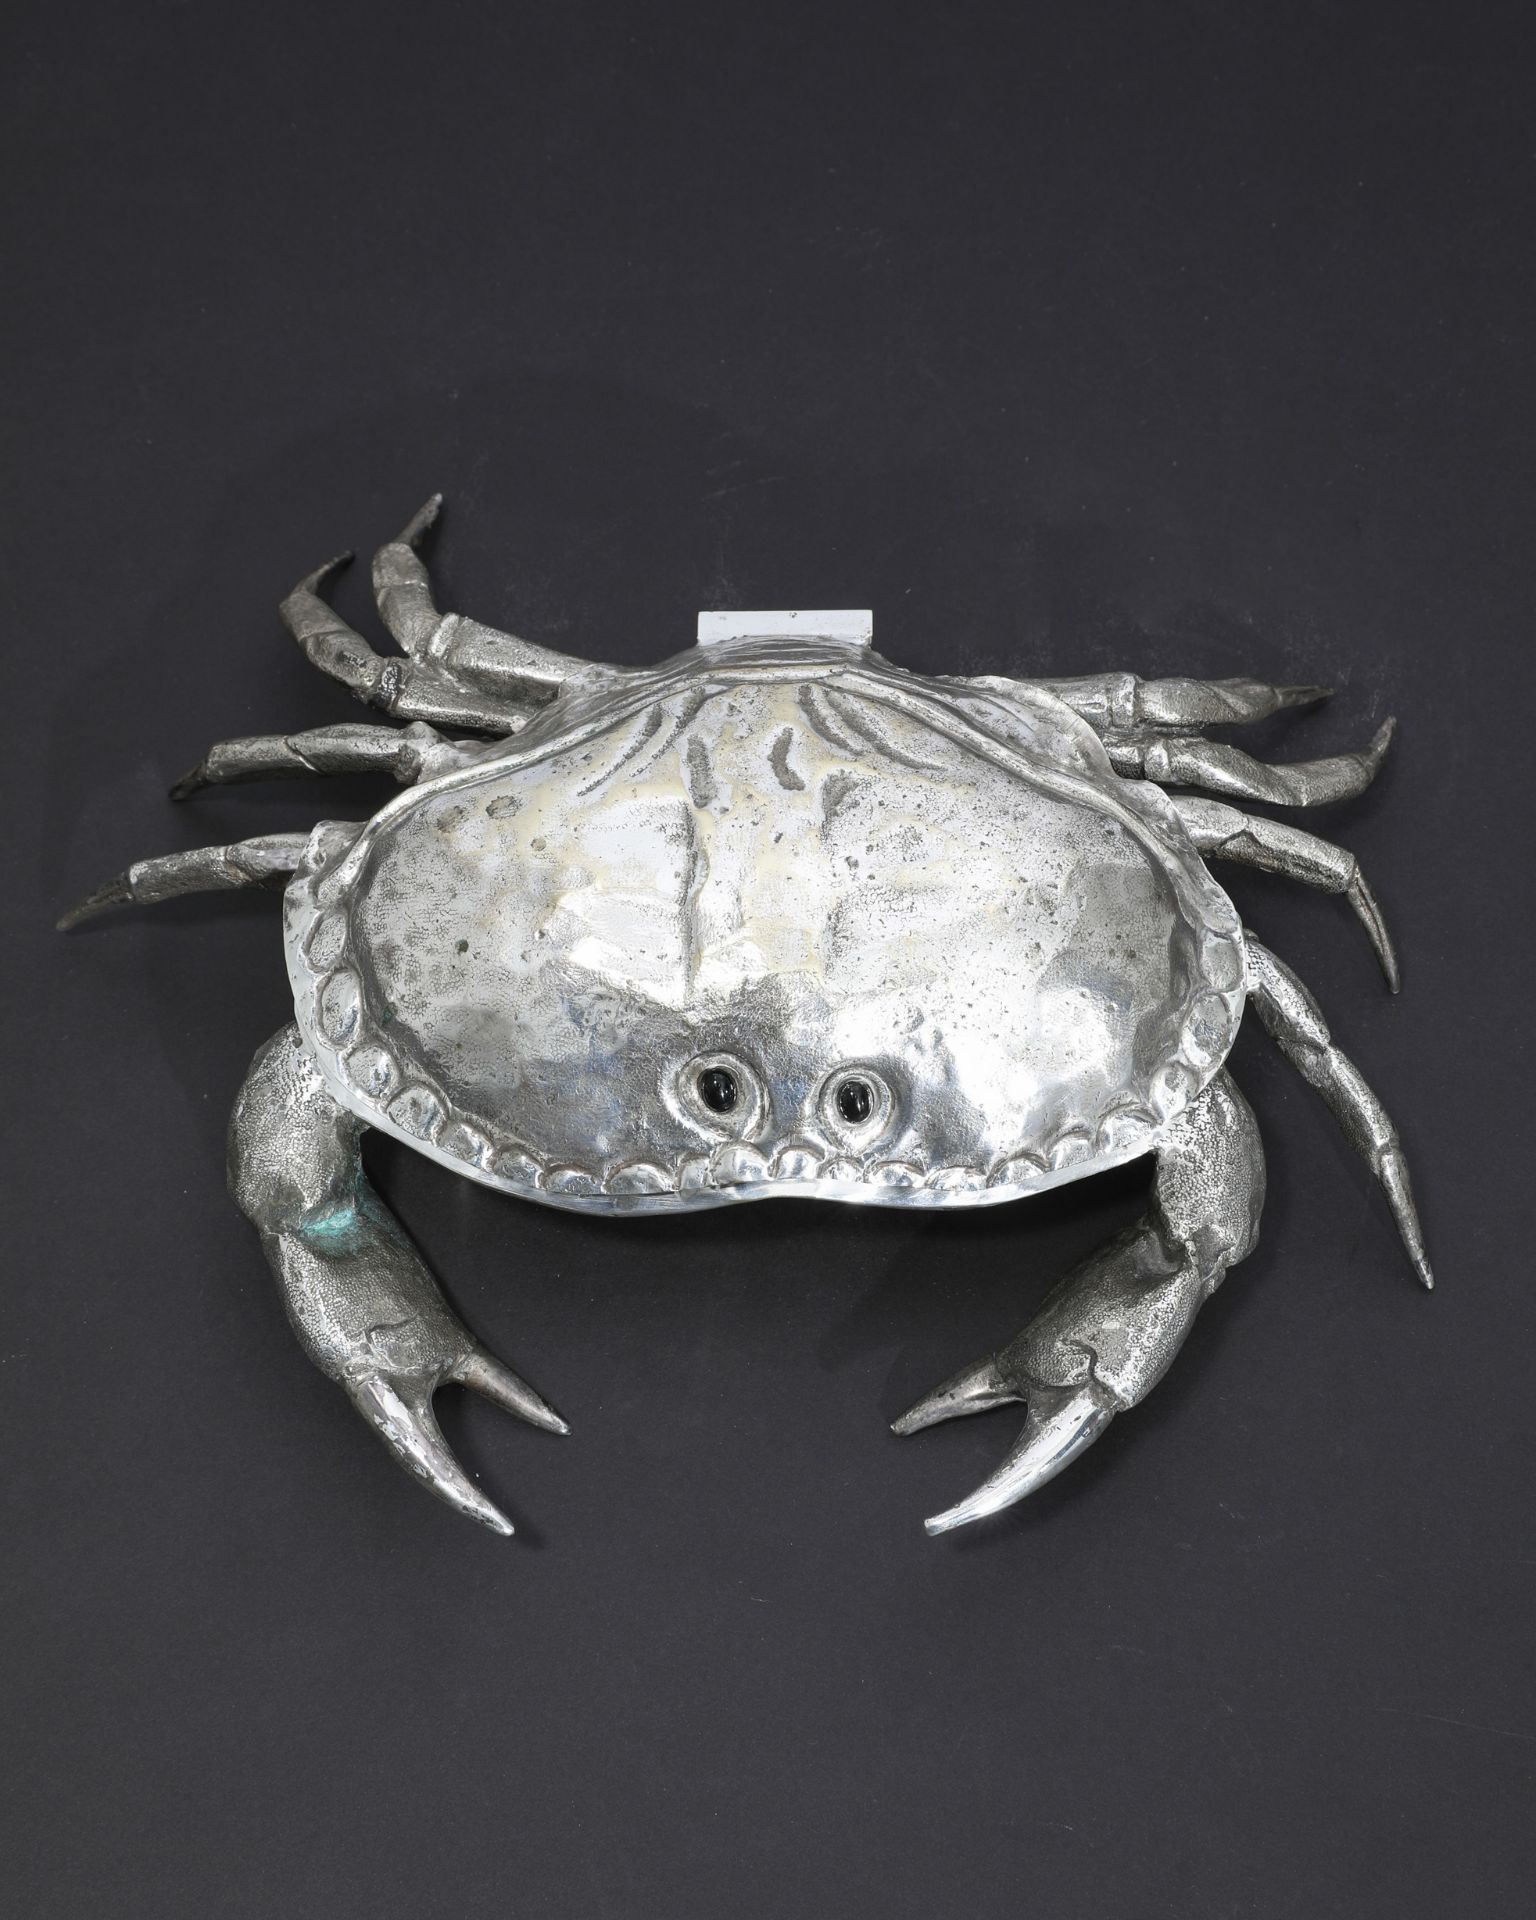 Franco Lapini, King Crab Caviar Bowl, Silver plated, Italy 1970s - Image 2 of 6